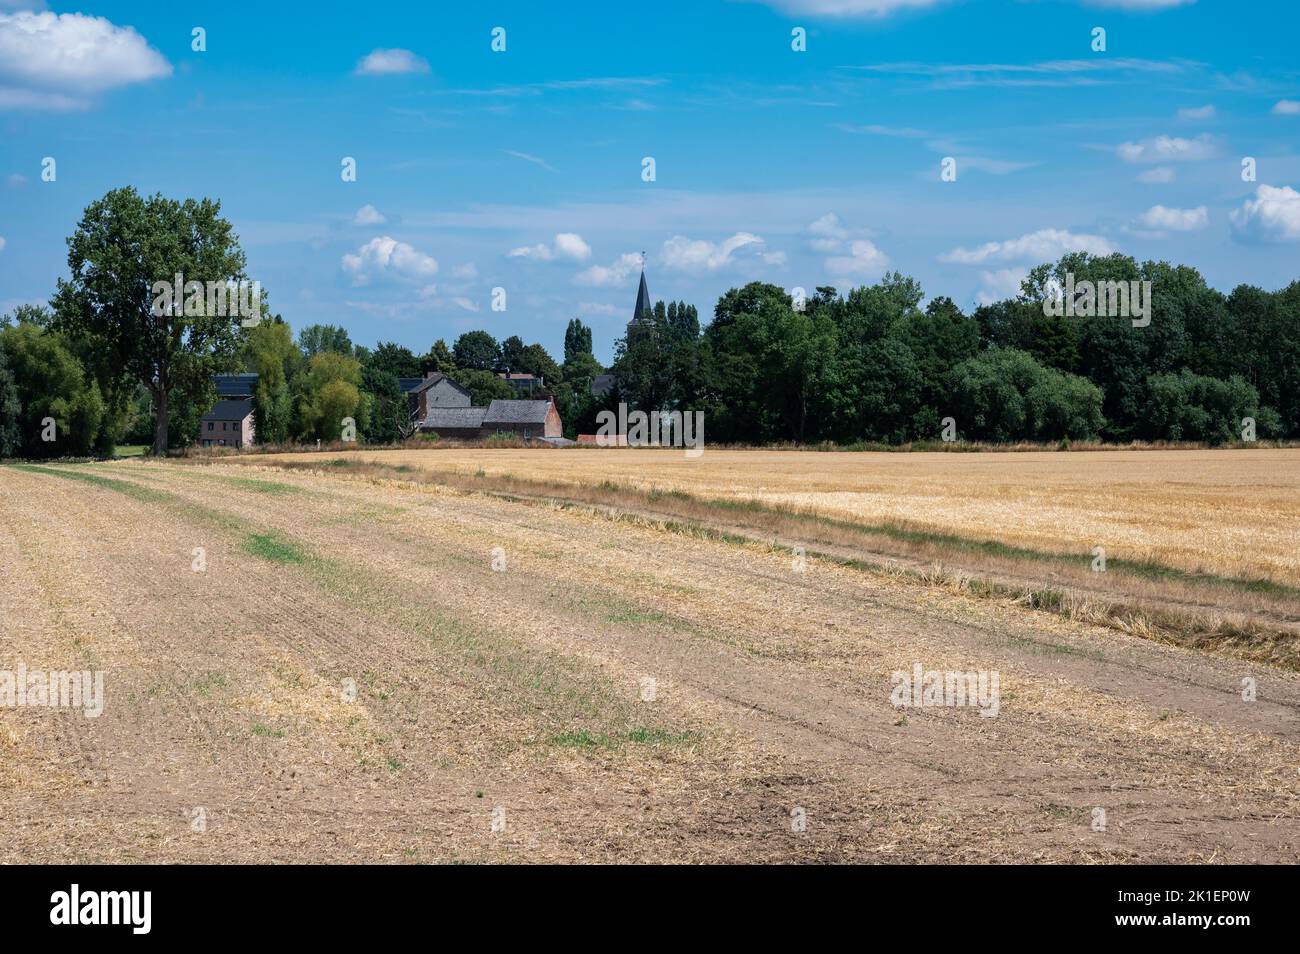 Ramilies, Wallon Region, Belgium, 08 02 2022 - Harvested golden agriculture field and farmhouse Stock Photo